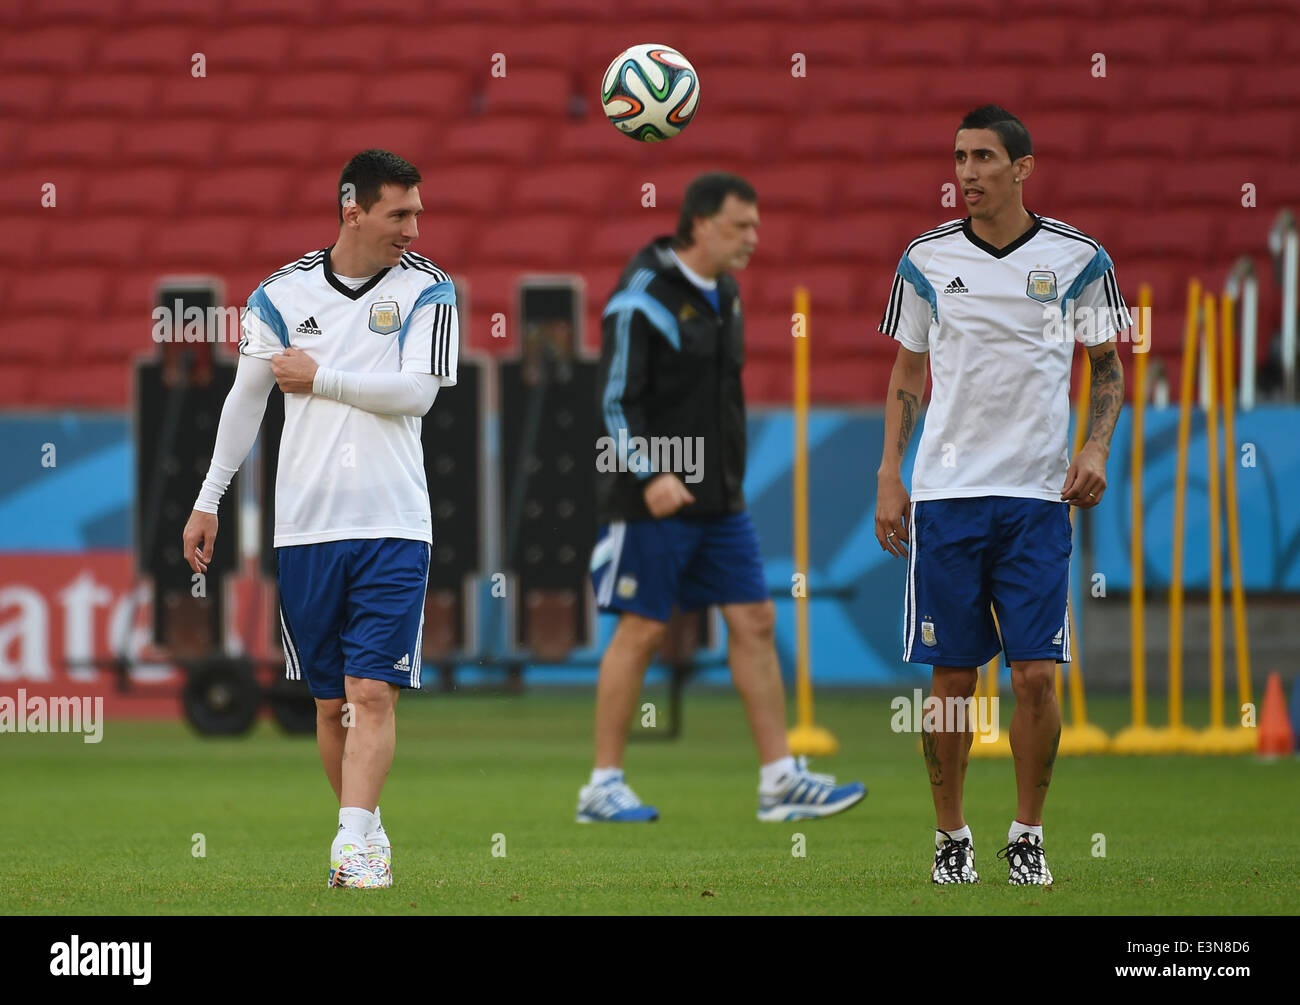 Porto Alegre, Brazil. 24th June, 2014. Argentina's Lionel Messi (L) and Angel Di Maria (R) are seen in a training session at the Estadio Beira-Rio Stadium ahead of a Group F match between Argentina and Nigeria of 2014 FIFA World Cup, in Porto Alegre, Brazil, June 24, 2014. Credit:  Li Ga/Xinhua/Alamy Live News Stock Photo